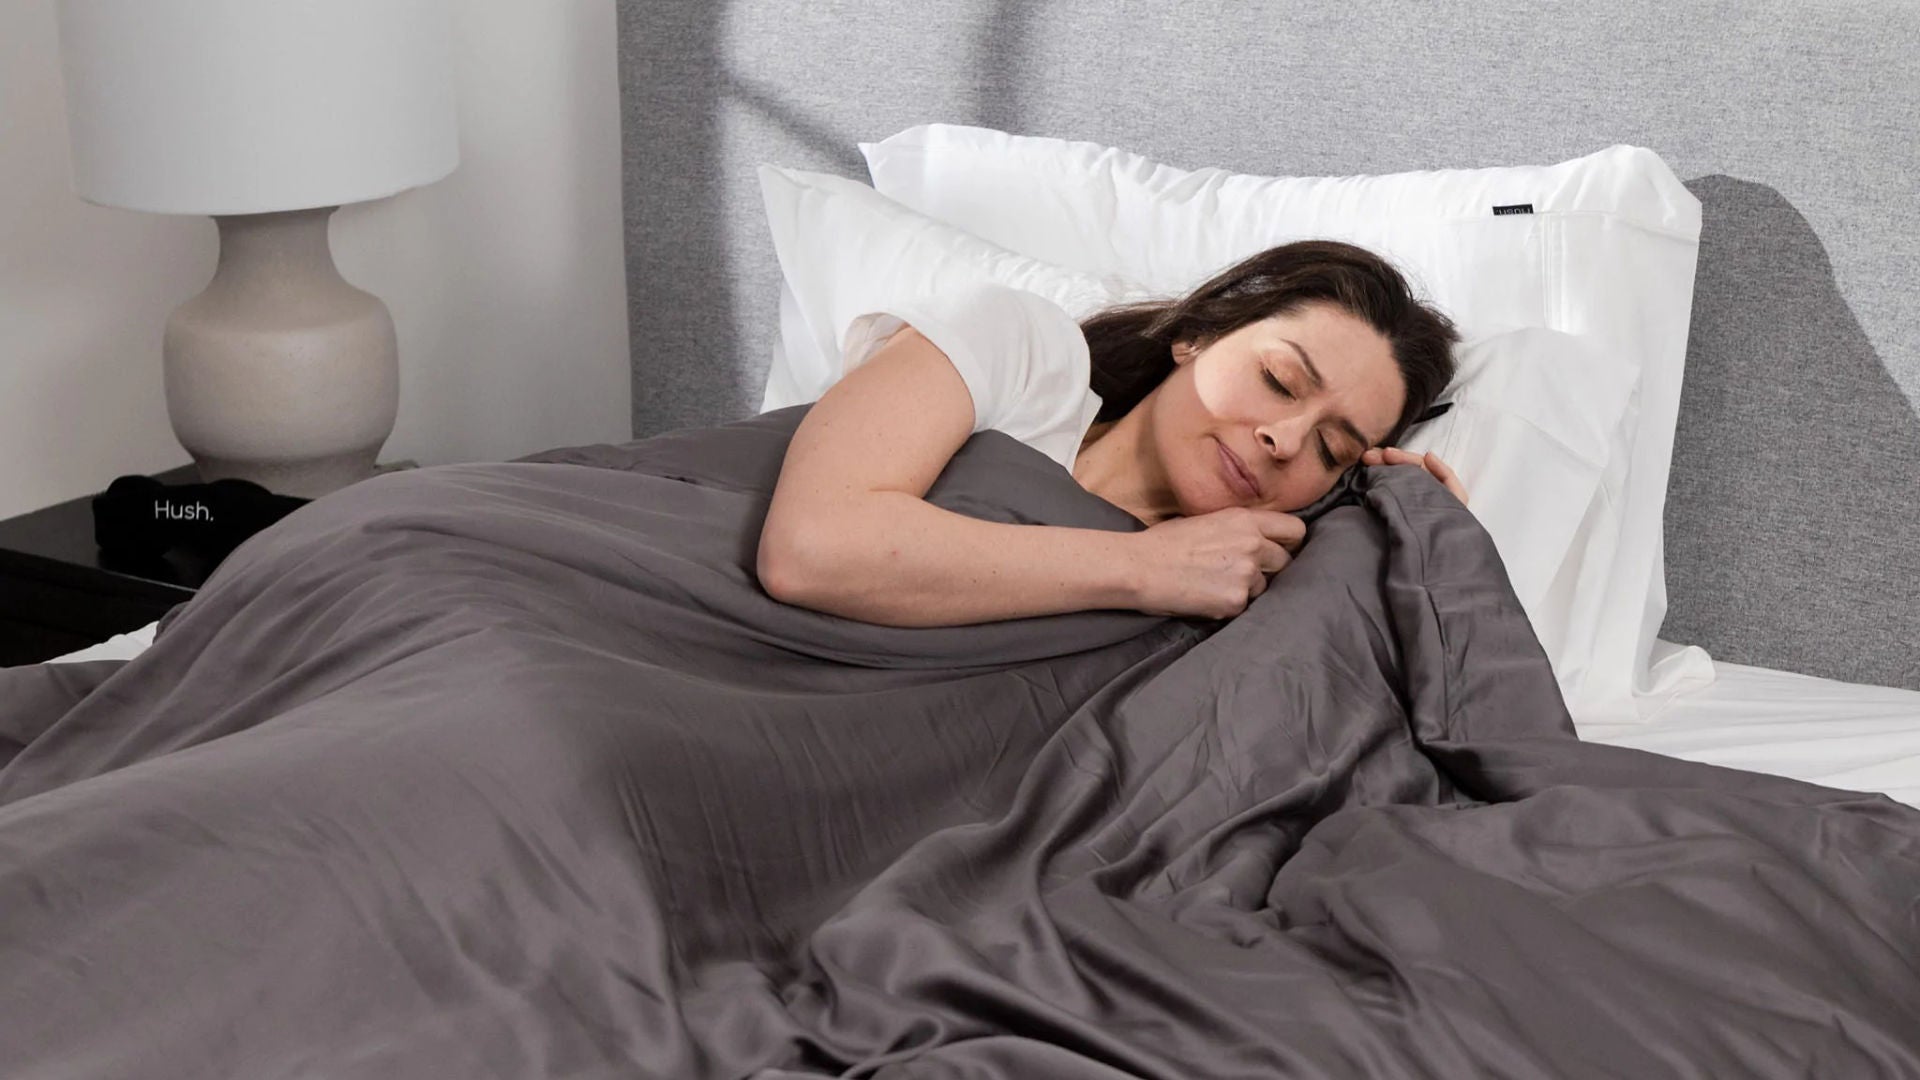 Shop Luxome's must-have cooling luxury bedding from sheets to